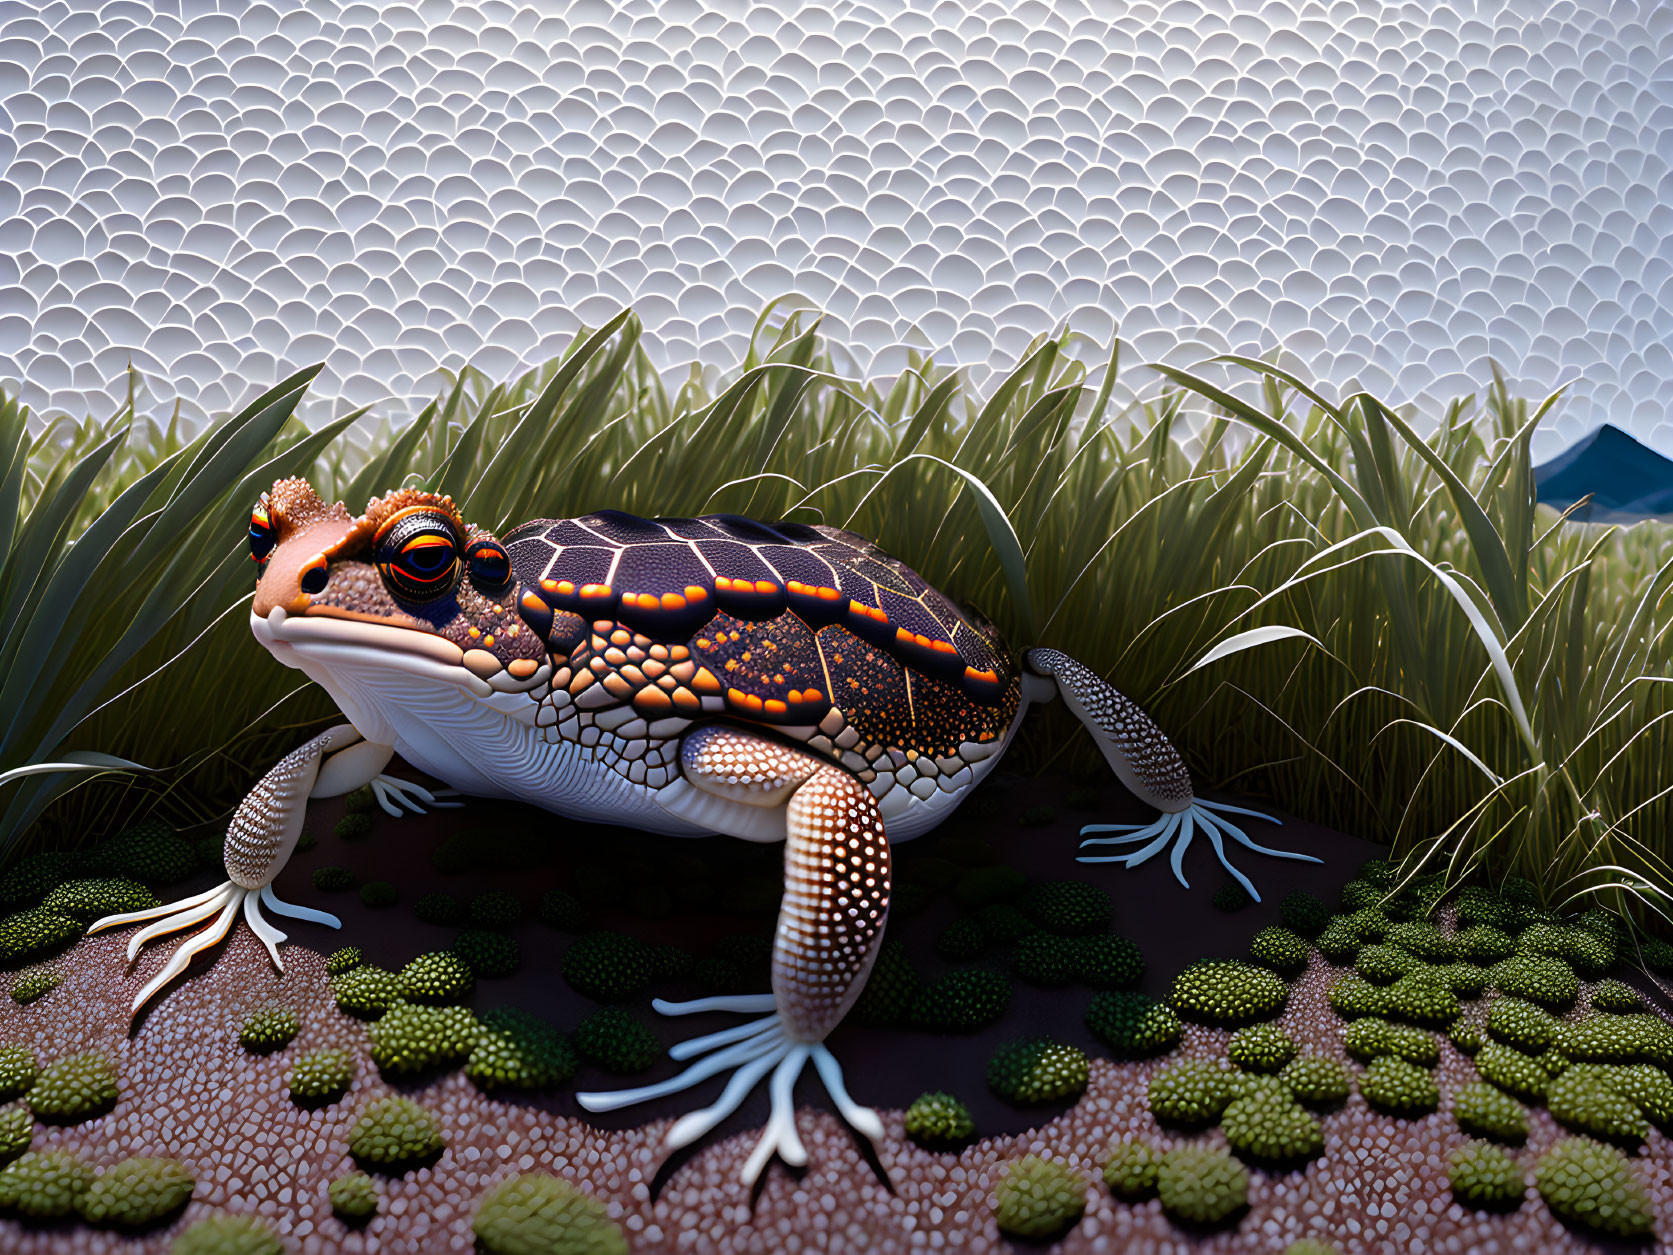 Vibrant digital art of a frog with intricate patterns, surrounded by green foliage and white hexagonal